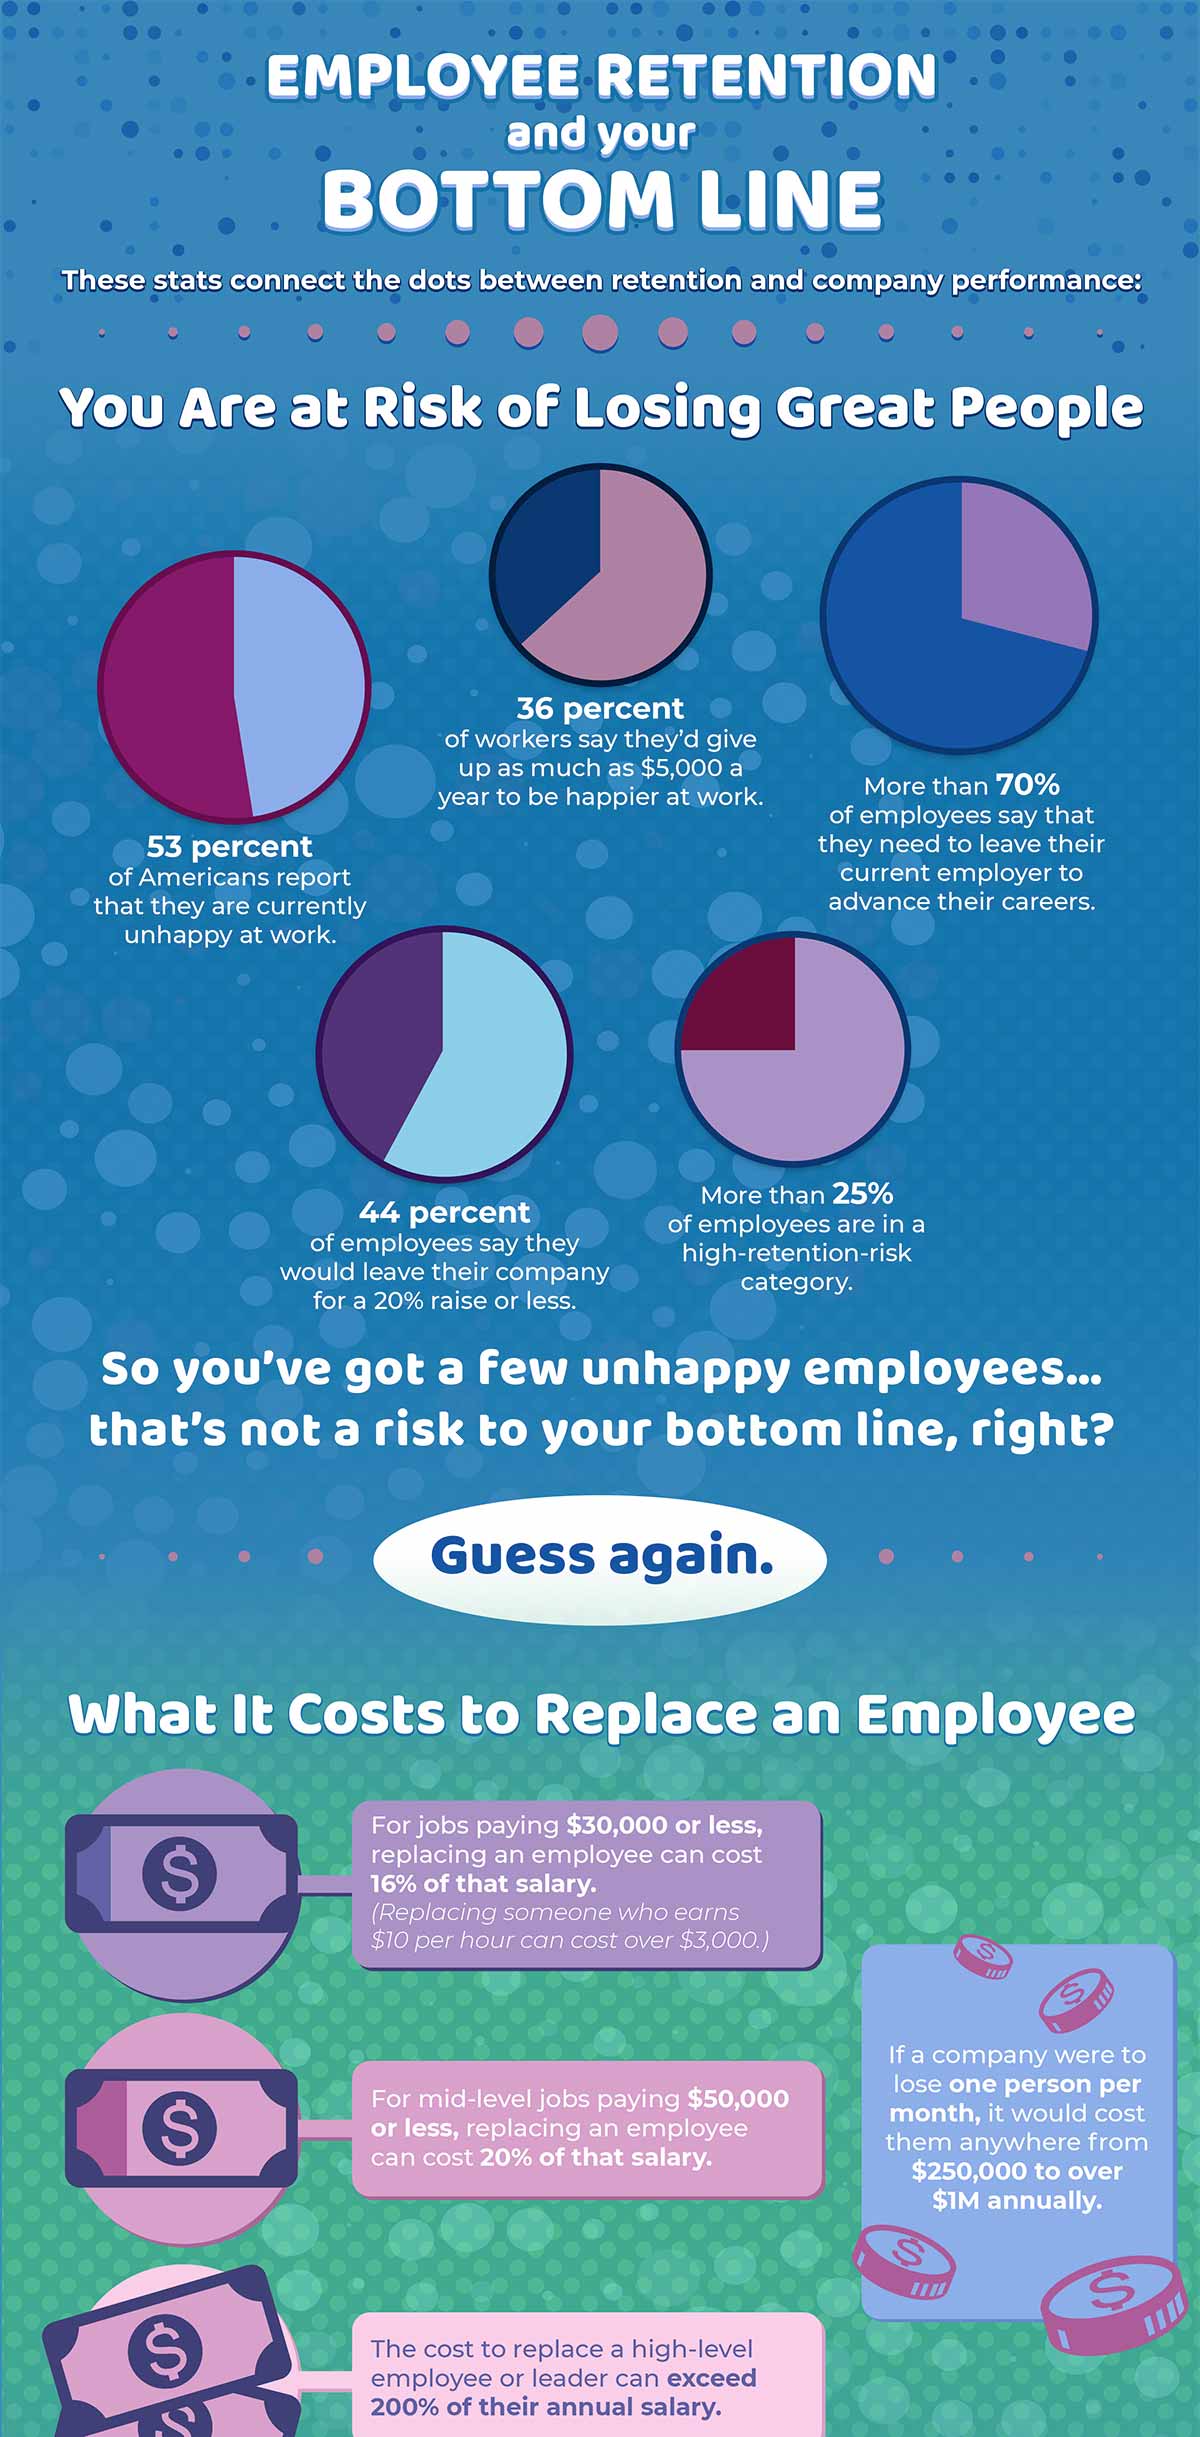 Employee Retention and Your Bottom Line